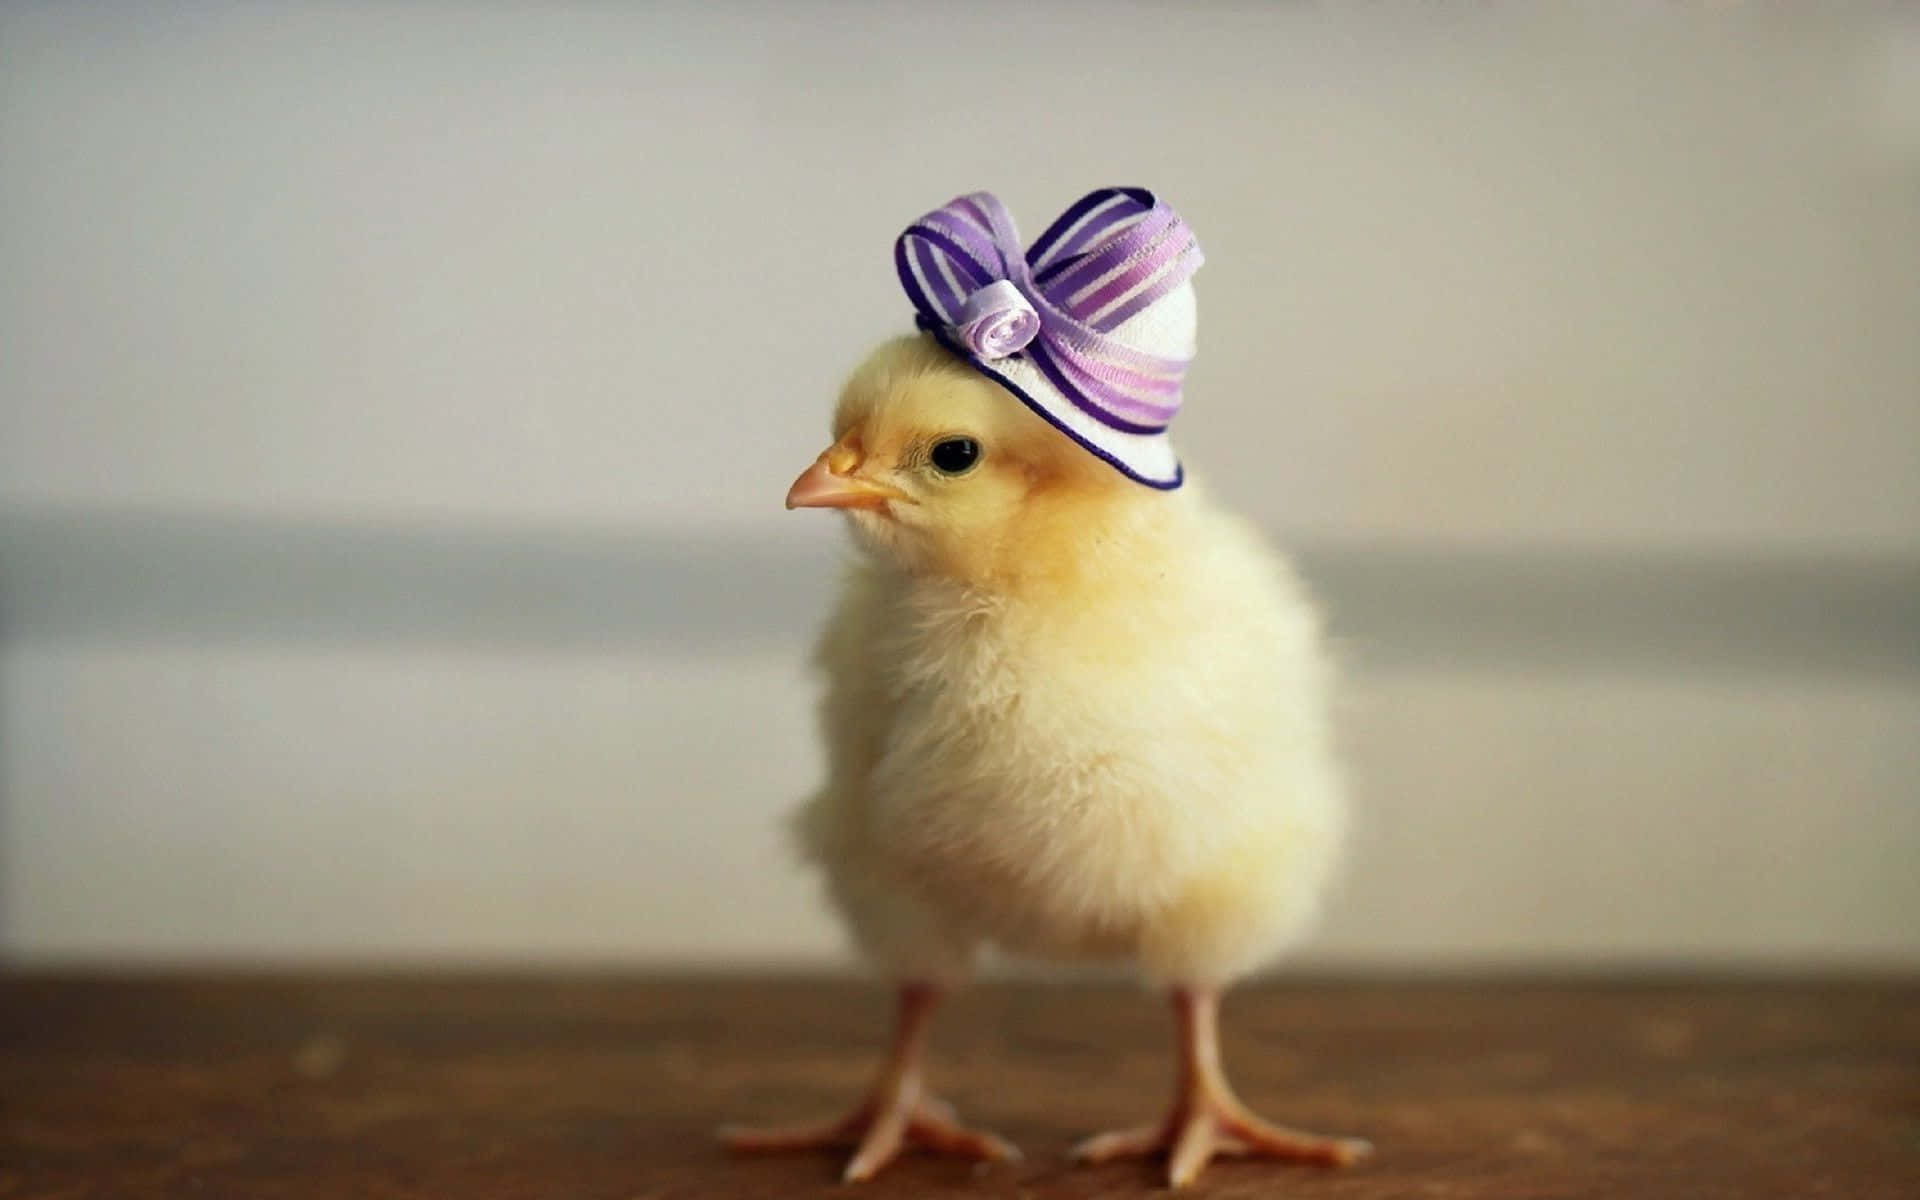 A Small Chicken Wearing A Purple Bow Hat